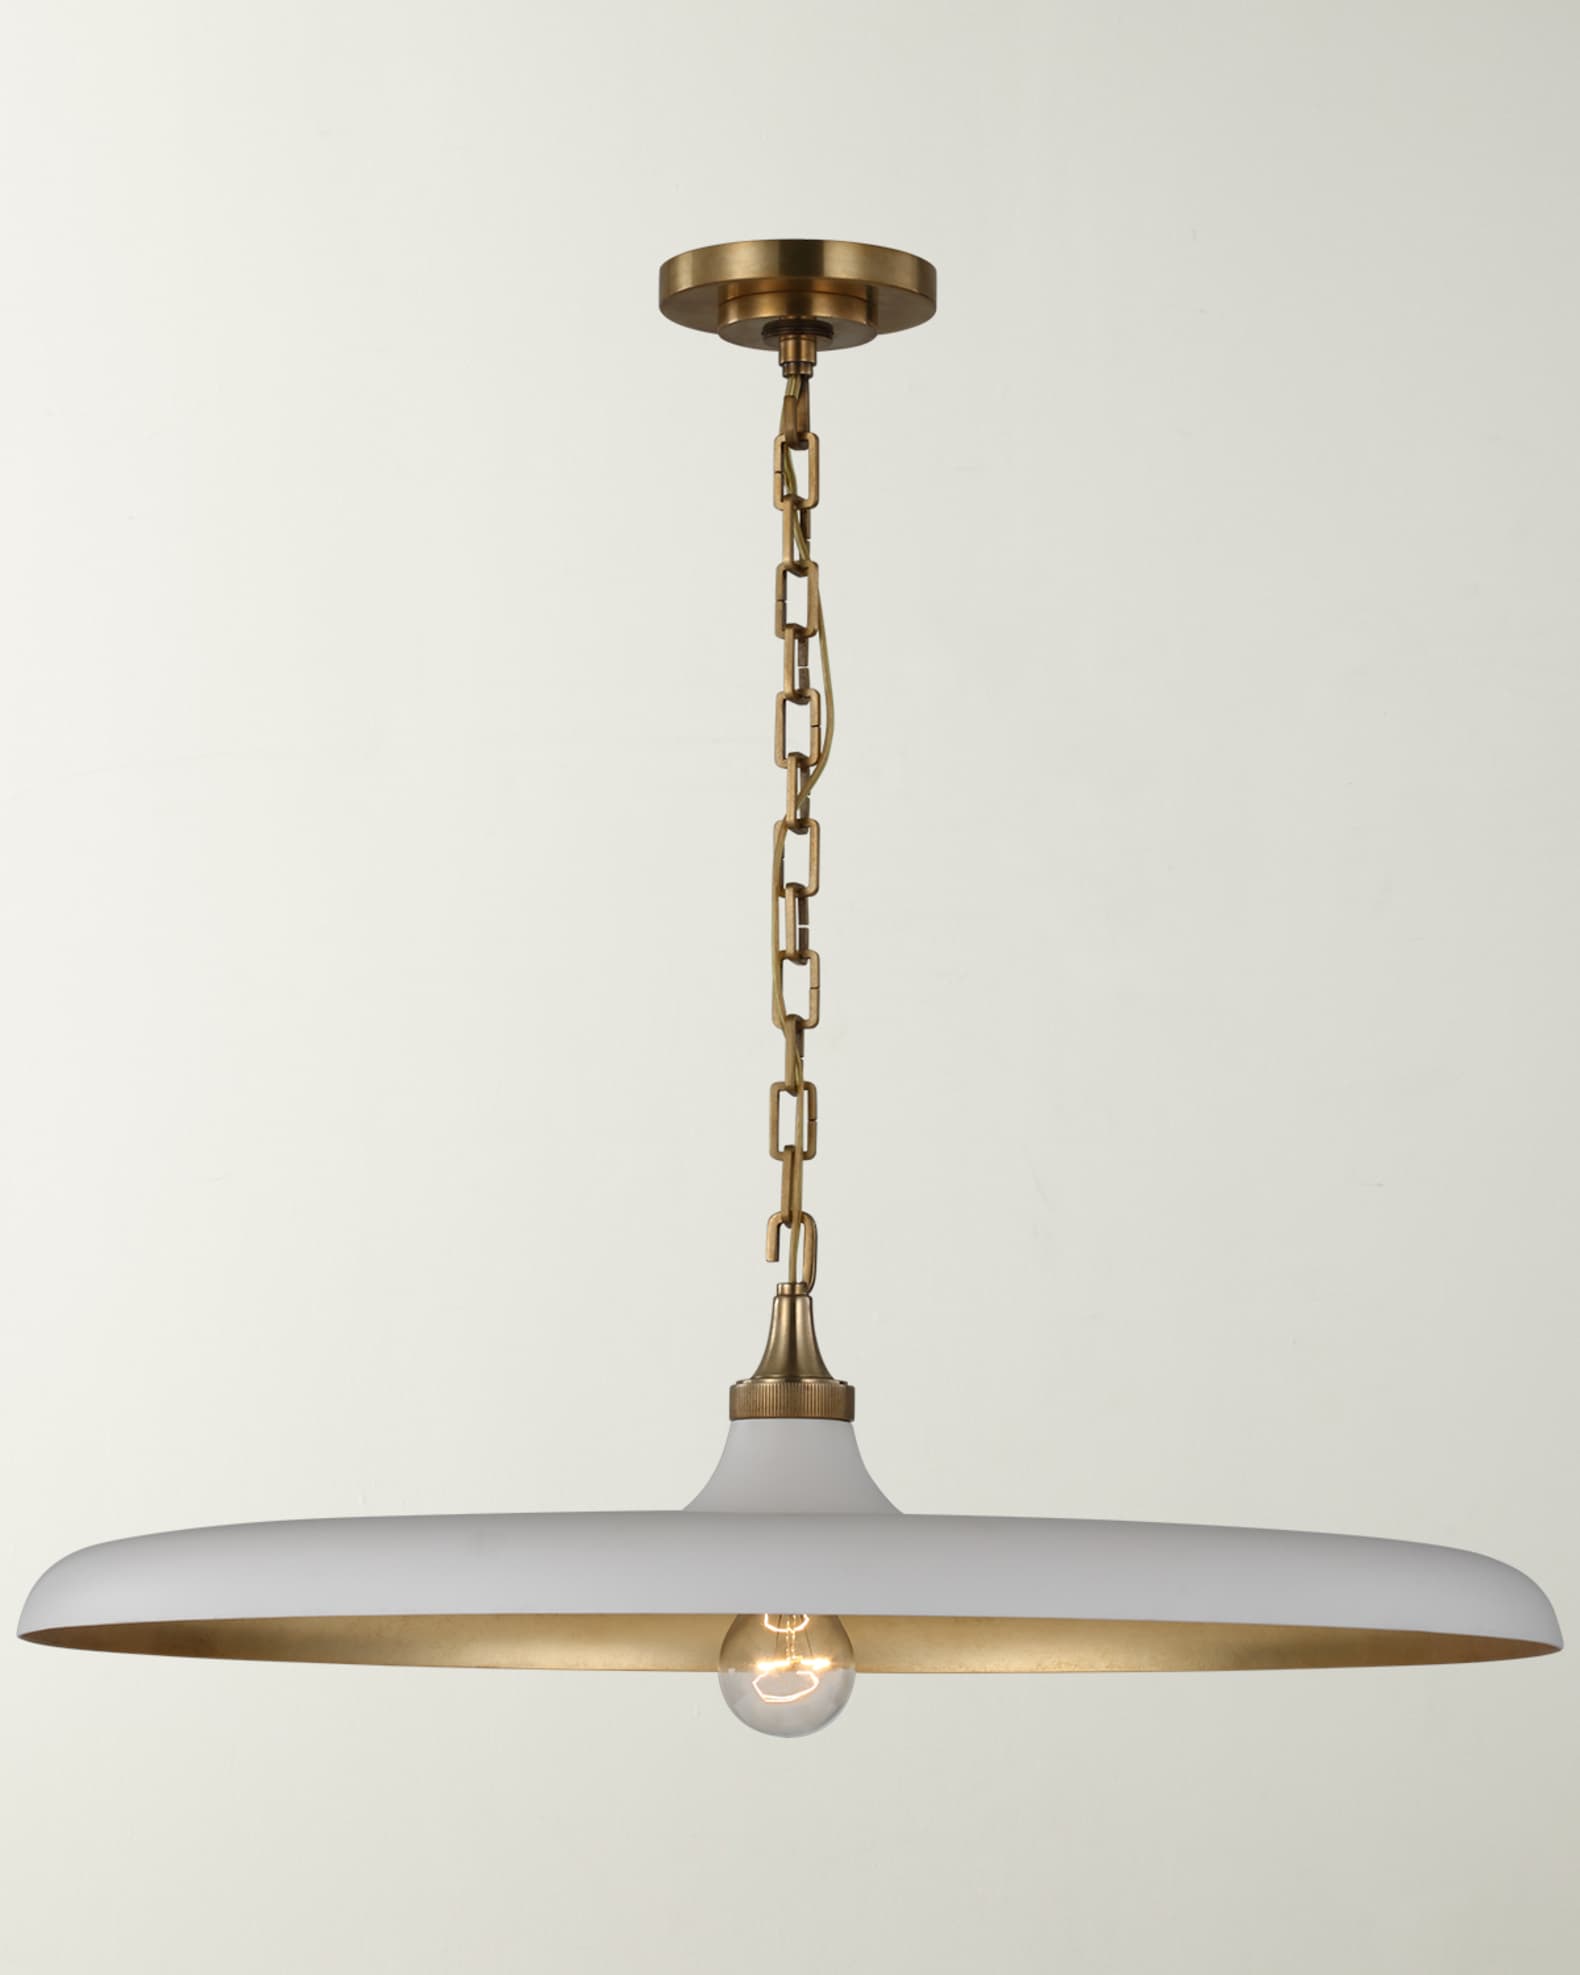 Visual Comfort Signature Piatto Large Pendant In Hand-Rubbed Antique Brass  With Plaster White Shade By Thomas O'Brien